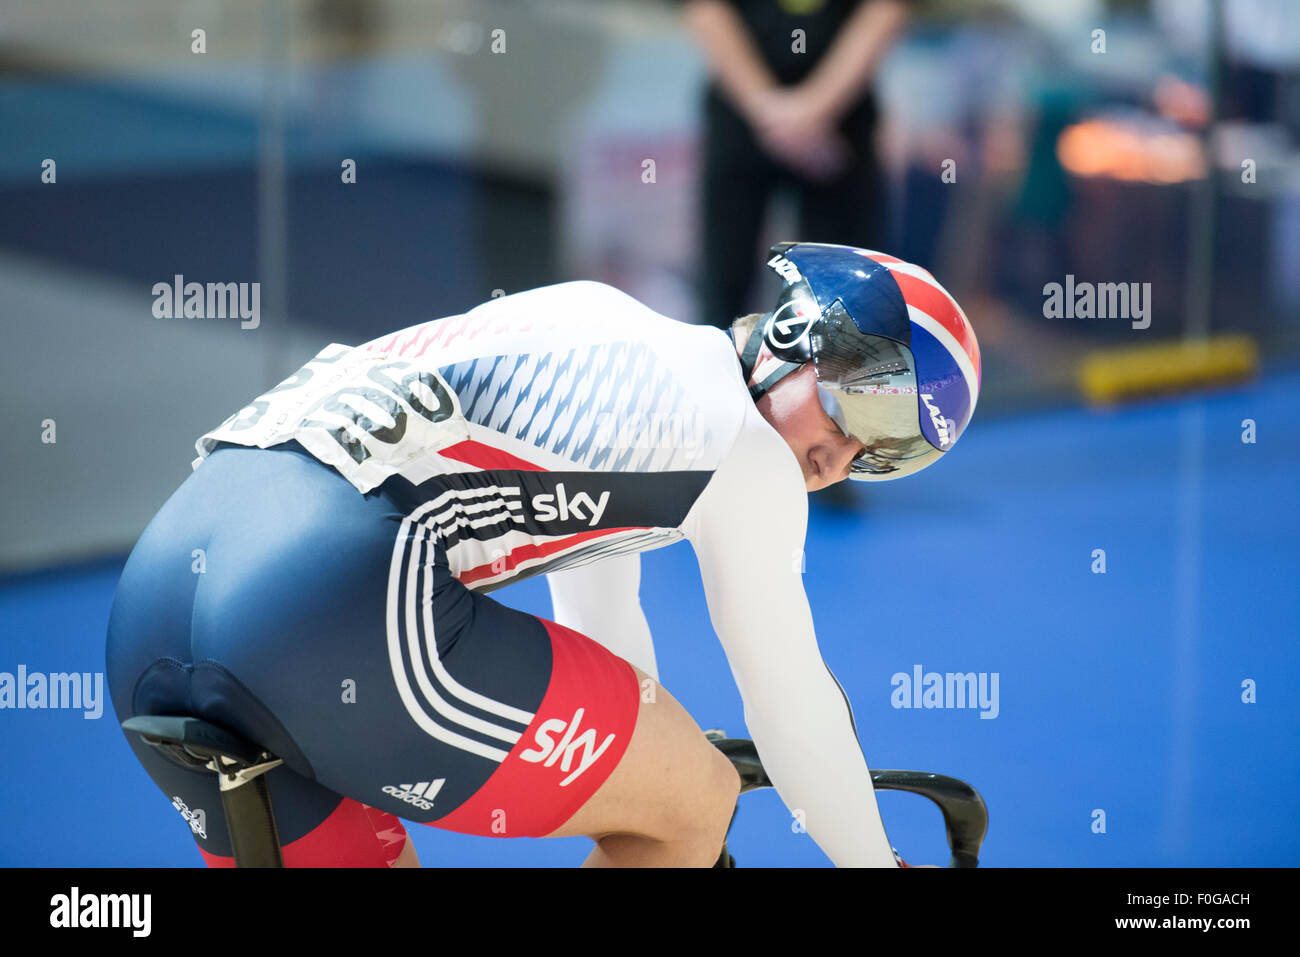 Derby, UK. 15th Aug, 2015. Olympic sprint champion Jason Kenny watches his opponent during the sprint competition at the Revolution Series at Derby Arena, Derby, United Kingdom on 15 August 2015. The Revolution Series is a professional track racing series featuring many of the world's best track cyclists. This event, taking place over 3 days from 14-16 August 2015, is an important preparation event for the Rio 2016 Olympic Games, allowing British riders to score qualifying points for the Games. Credit:  Andrew Peat/Alamy Live News Stock Photo